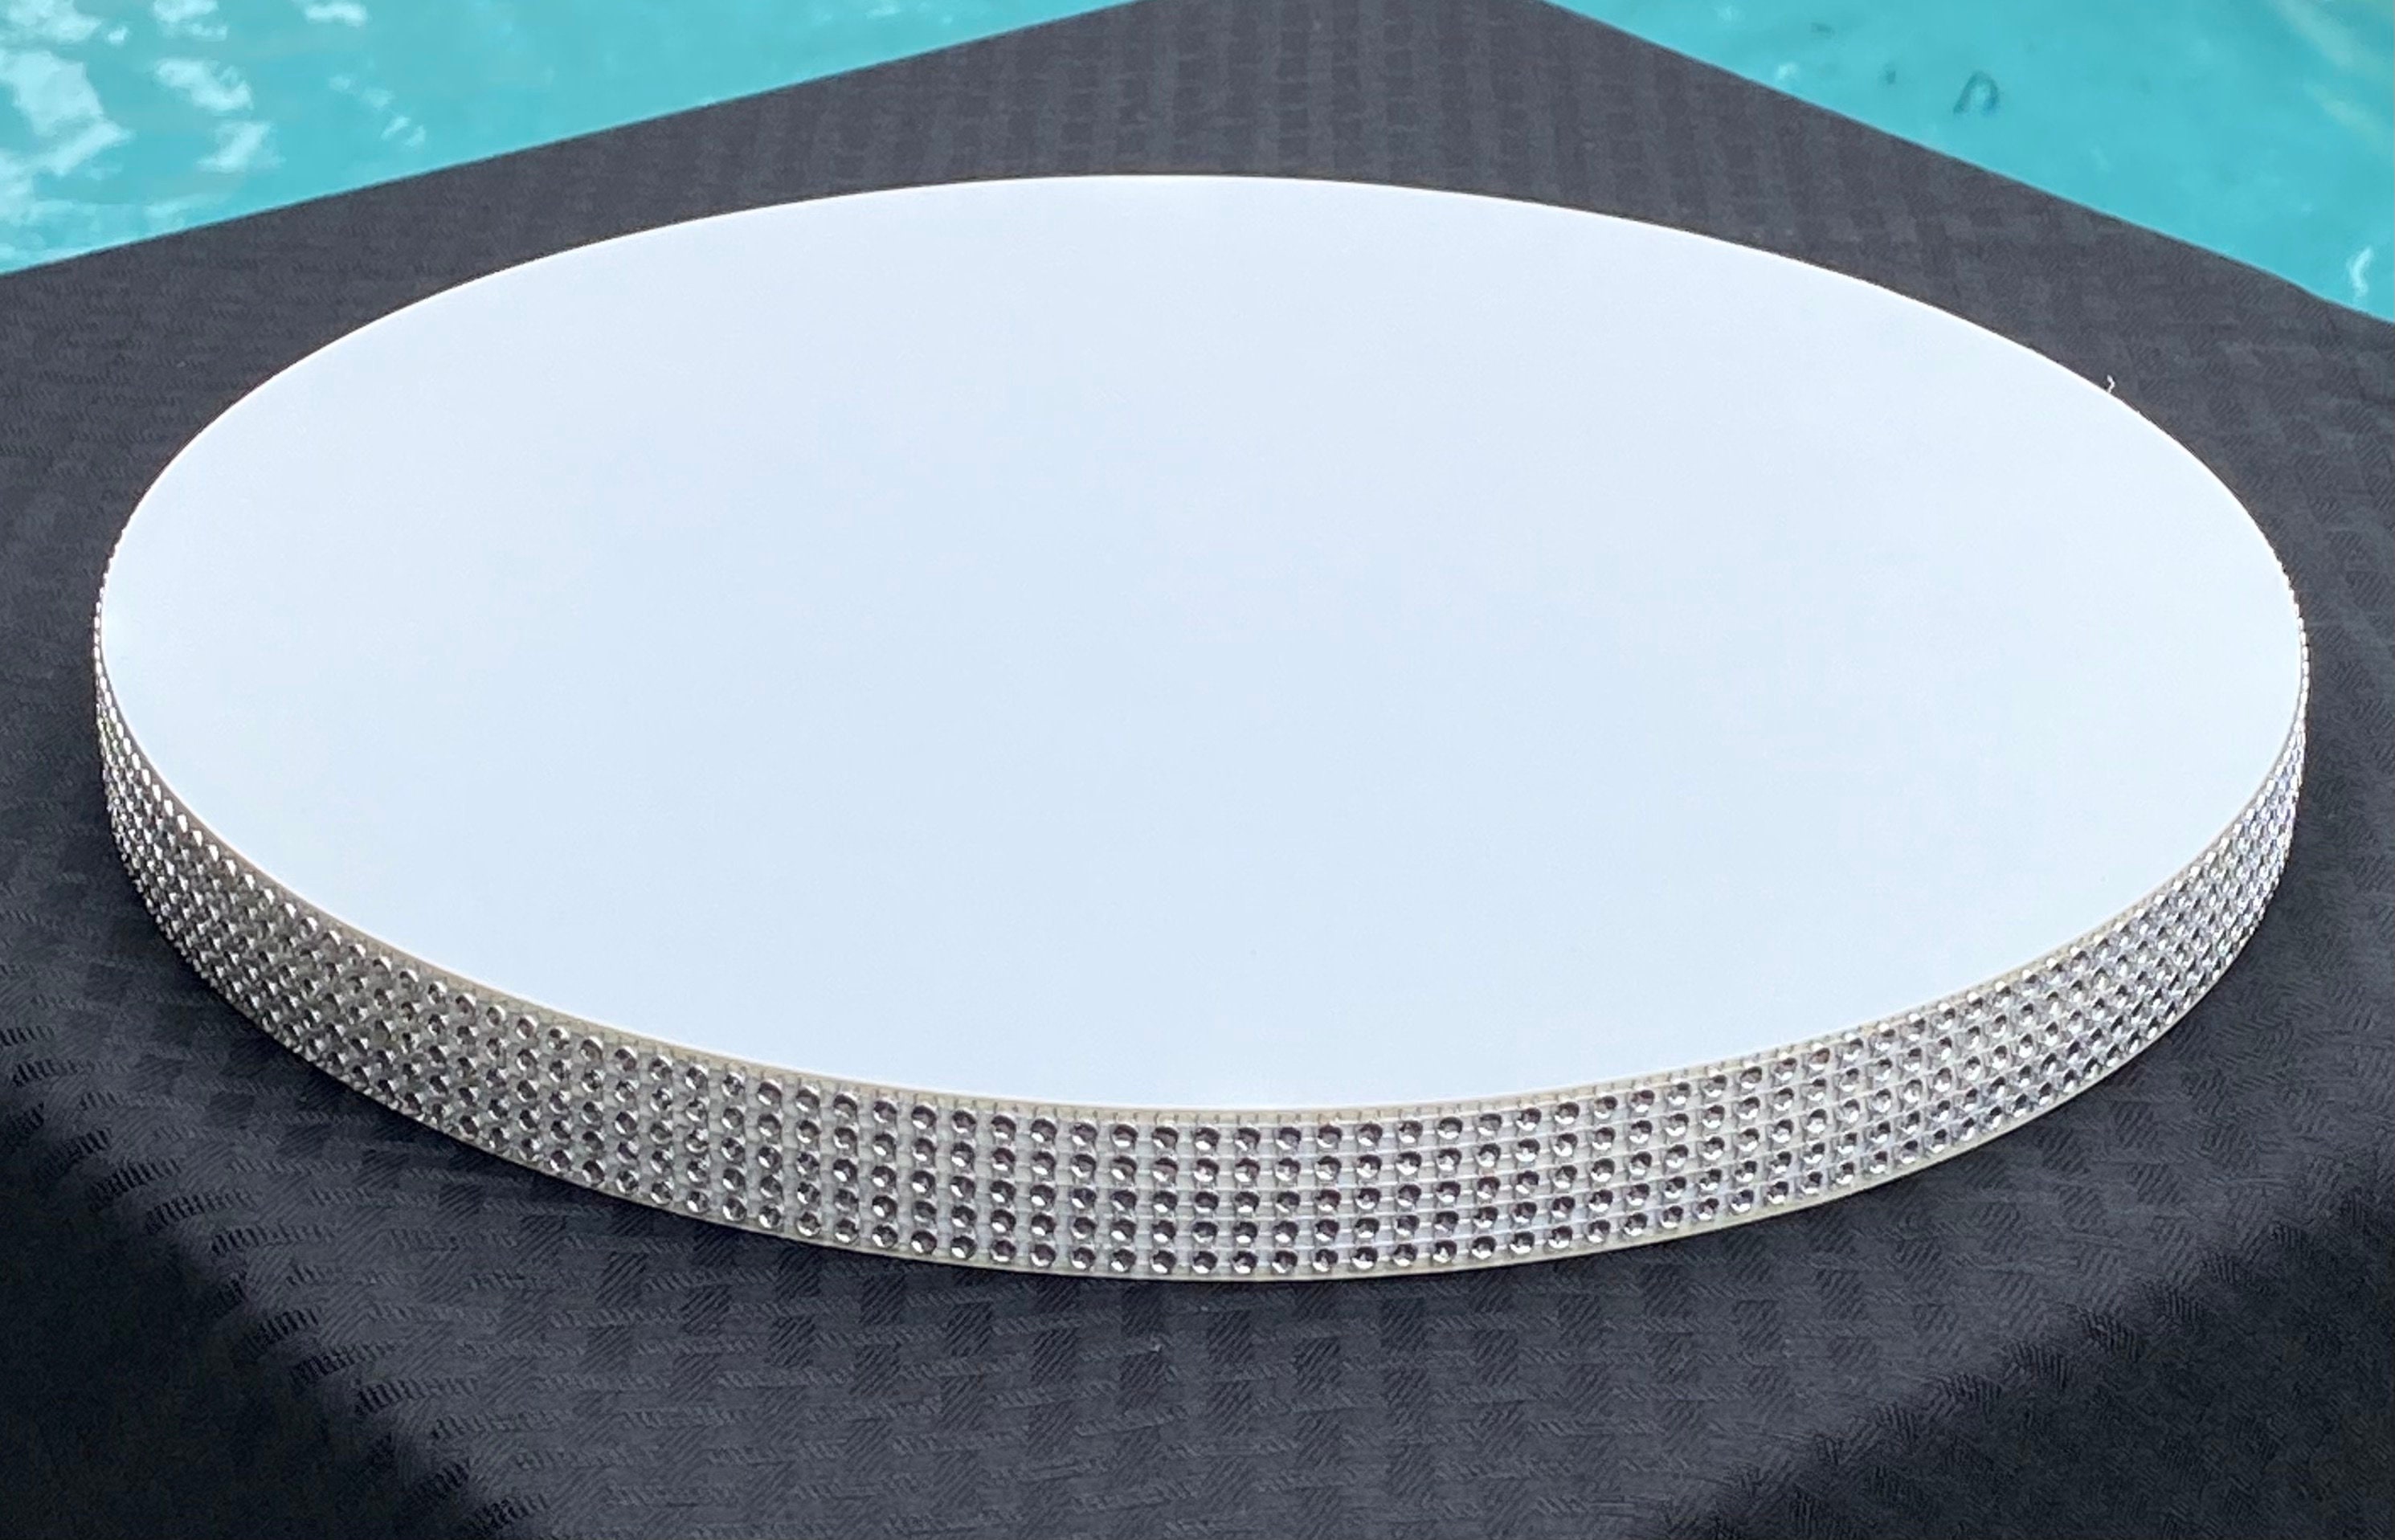 Cake board rond 33 cm argent